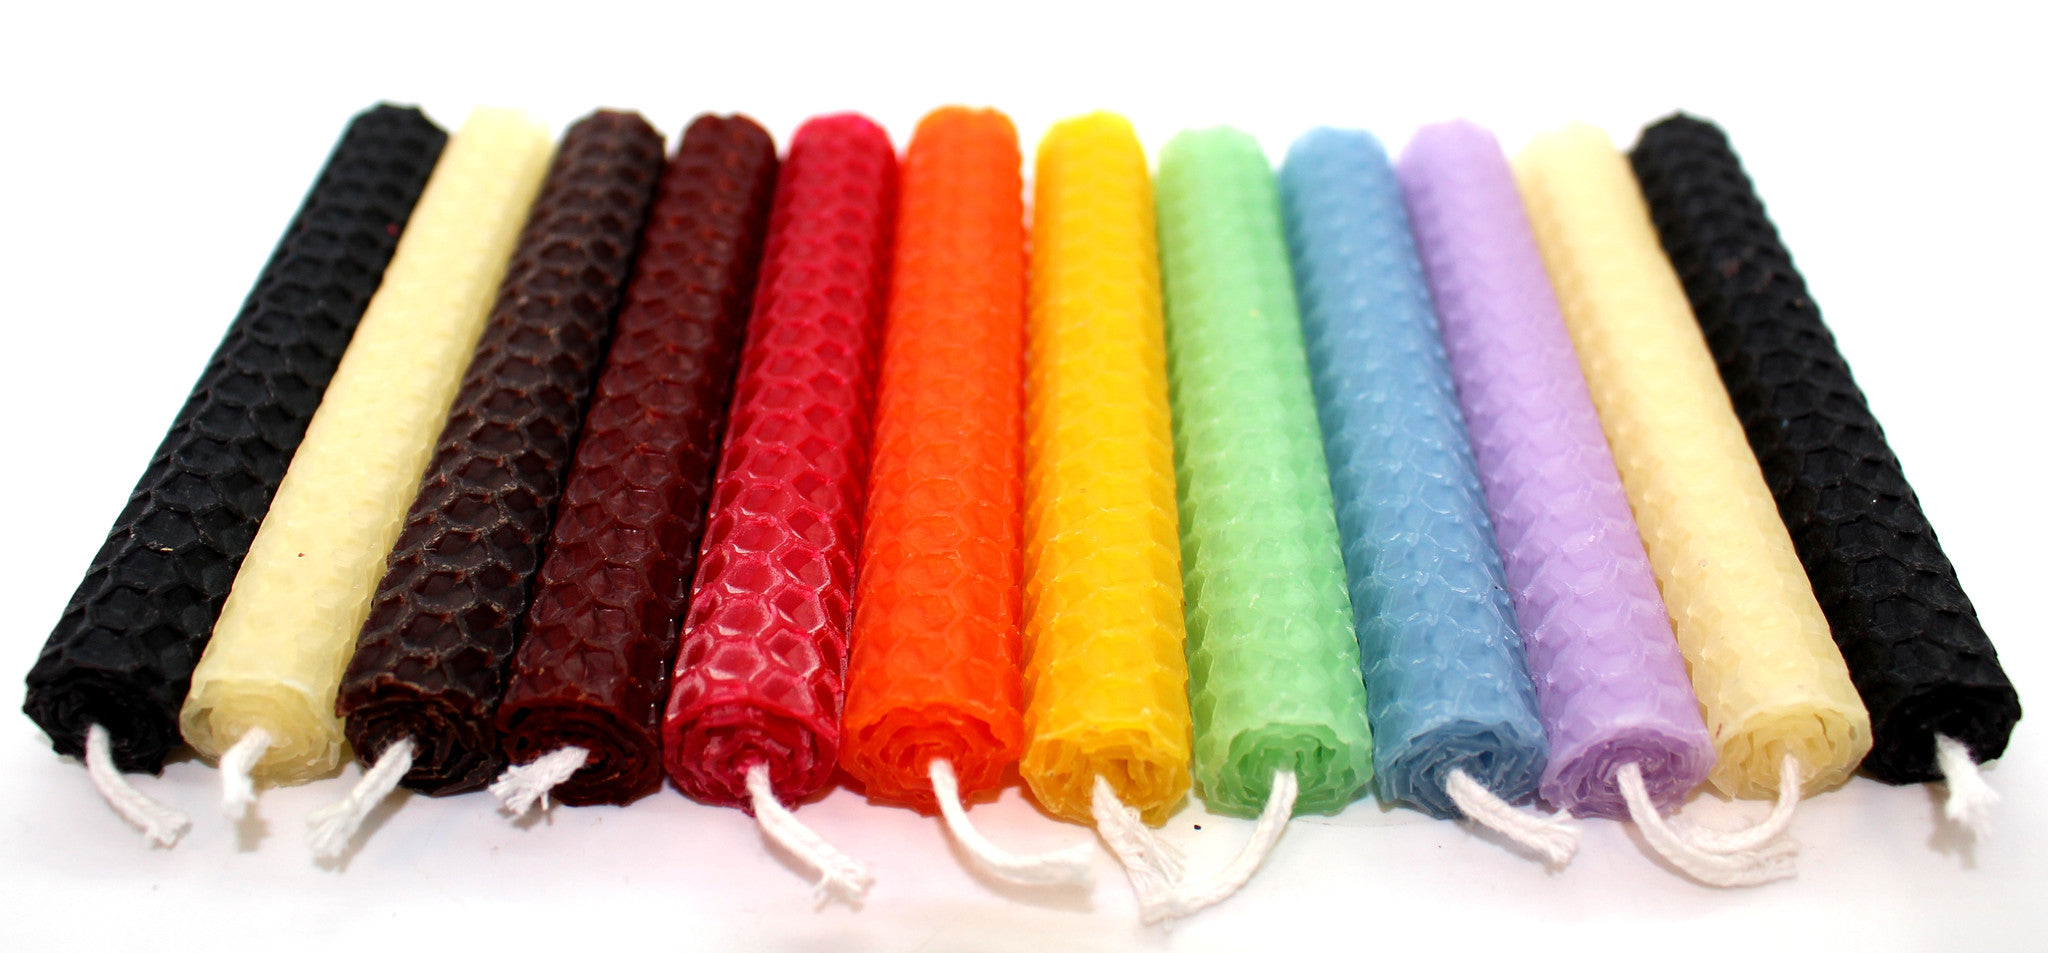 12 Assorted Beeswax Hand Rolled Candles that are black, orange, purple, burgundy, yellow, green, blue and red